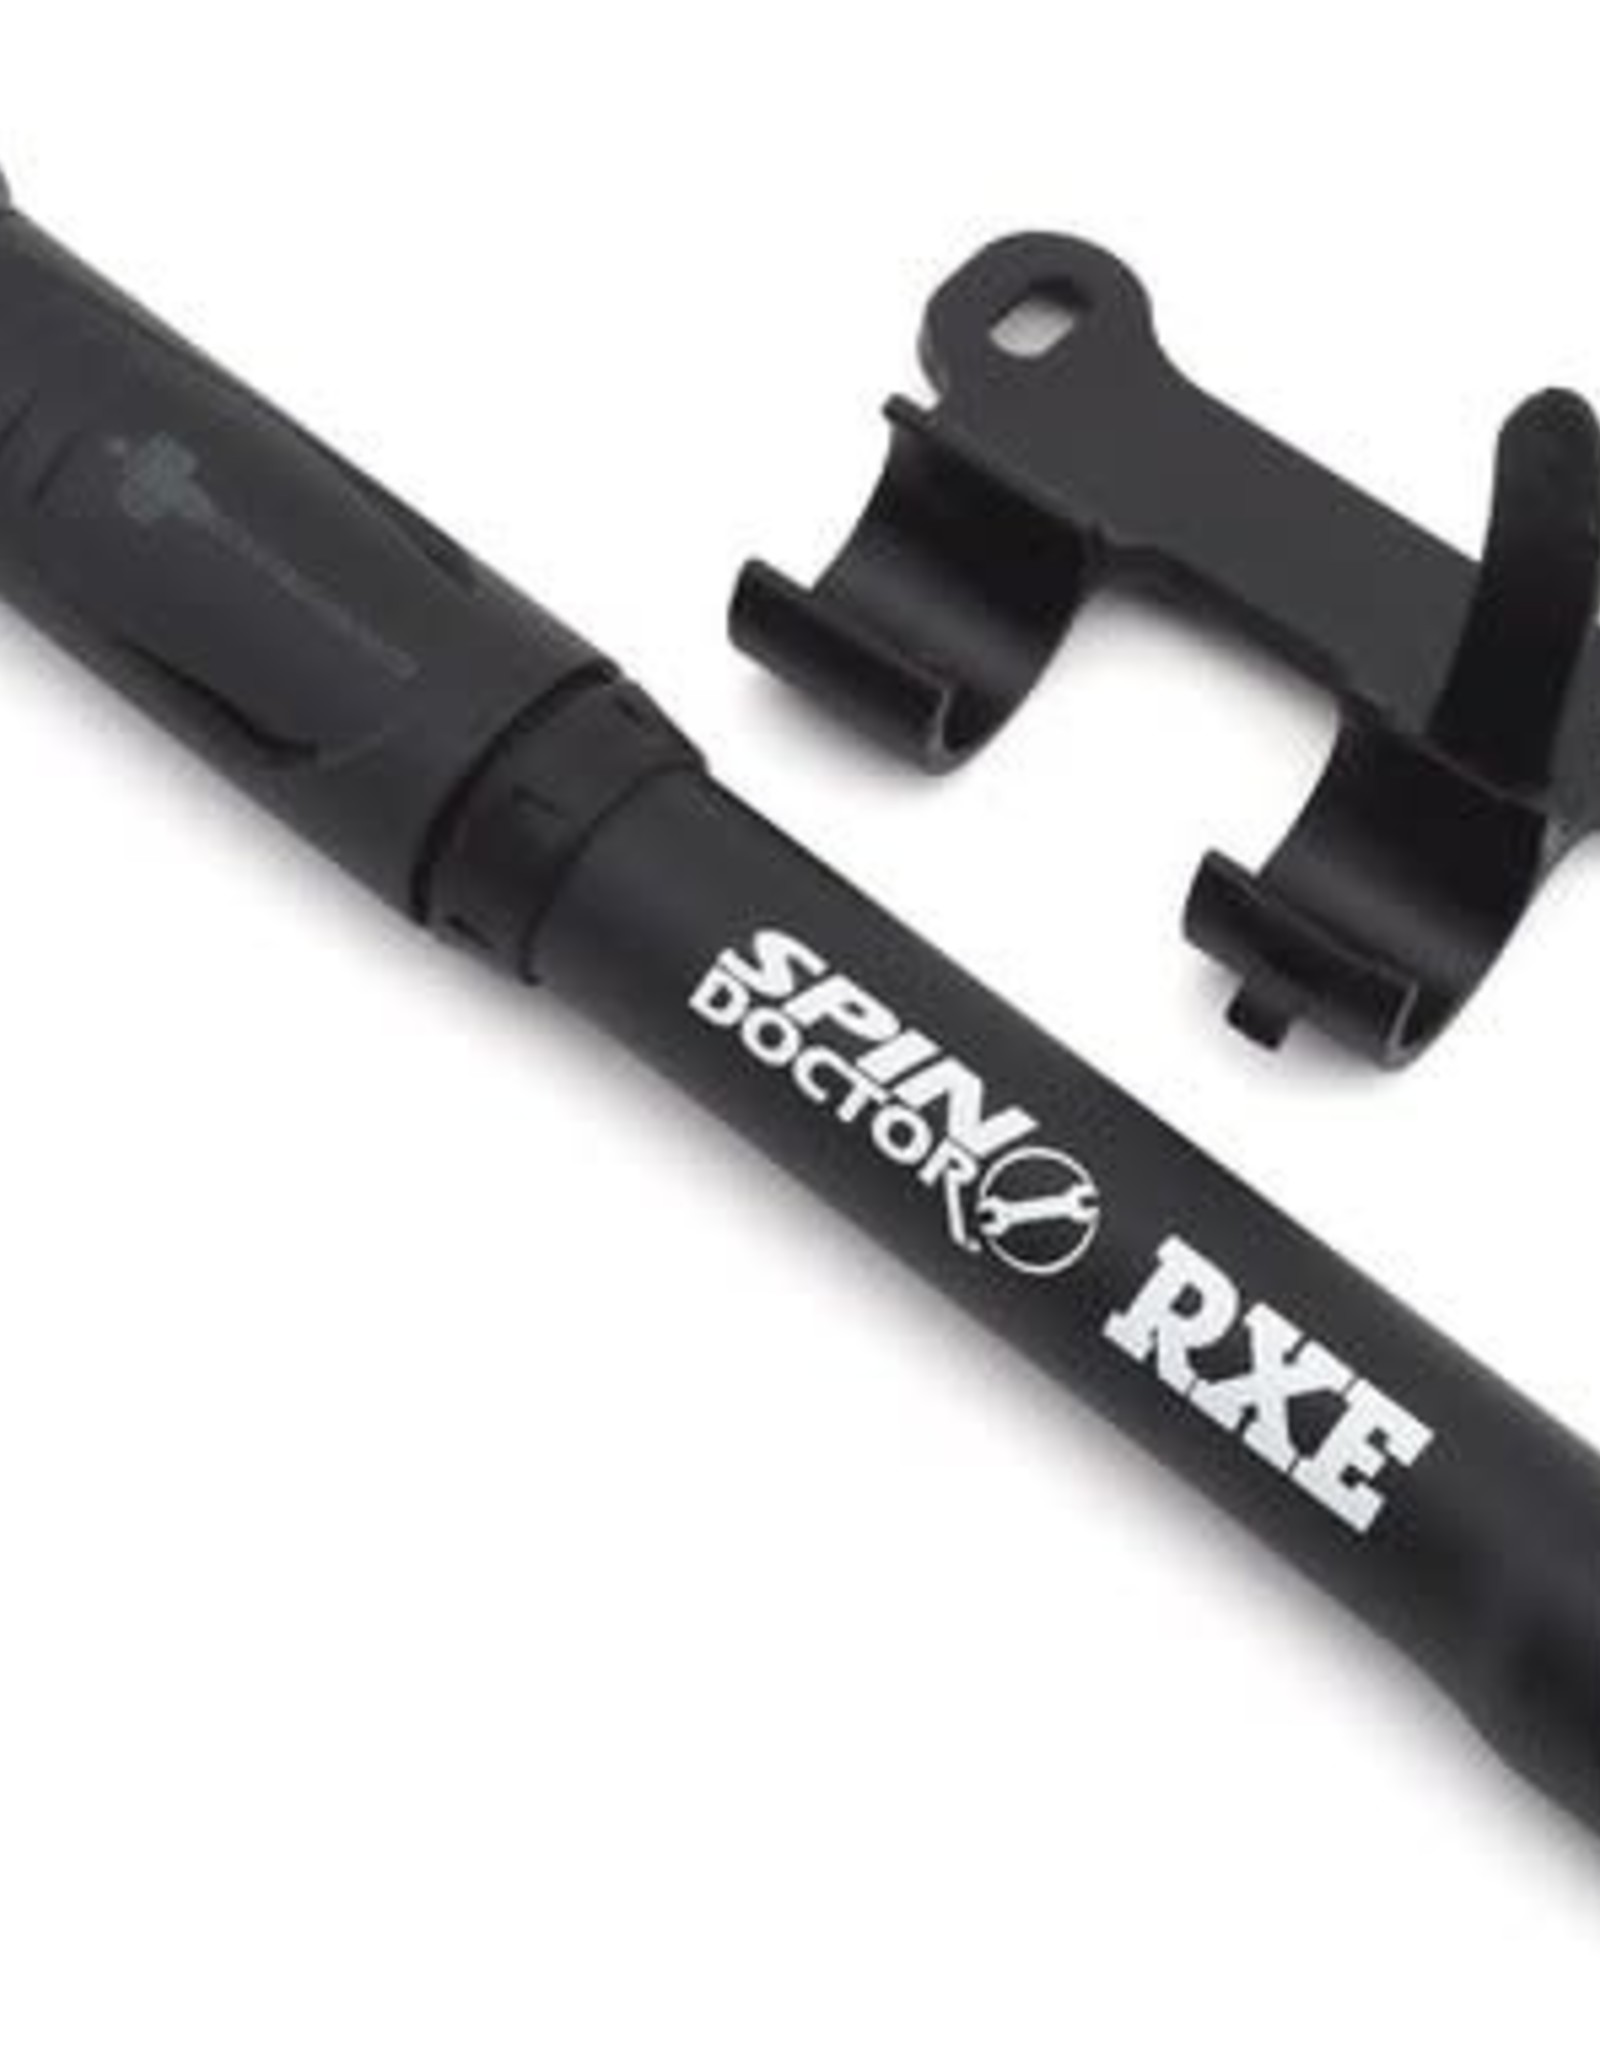 Spin Dr. Spin Dr RXE Mini Pump